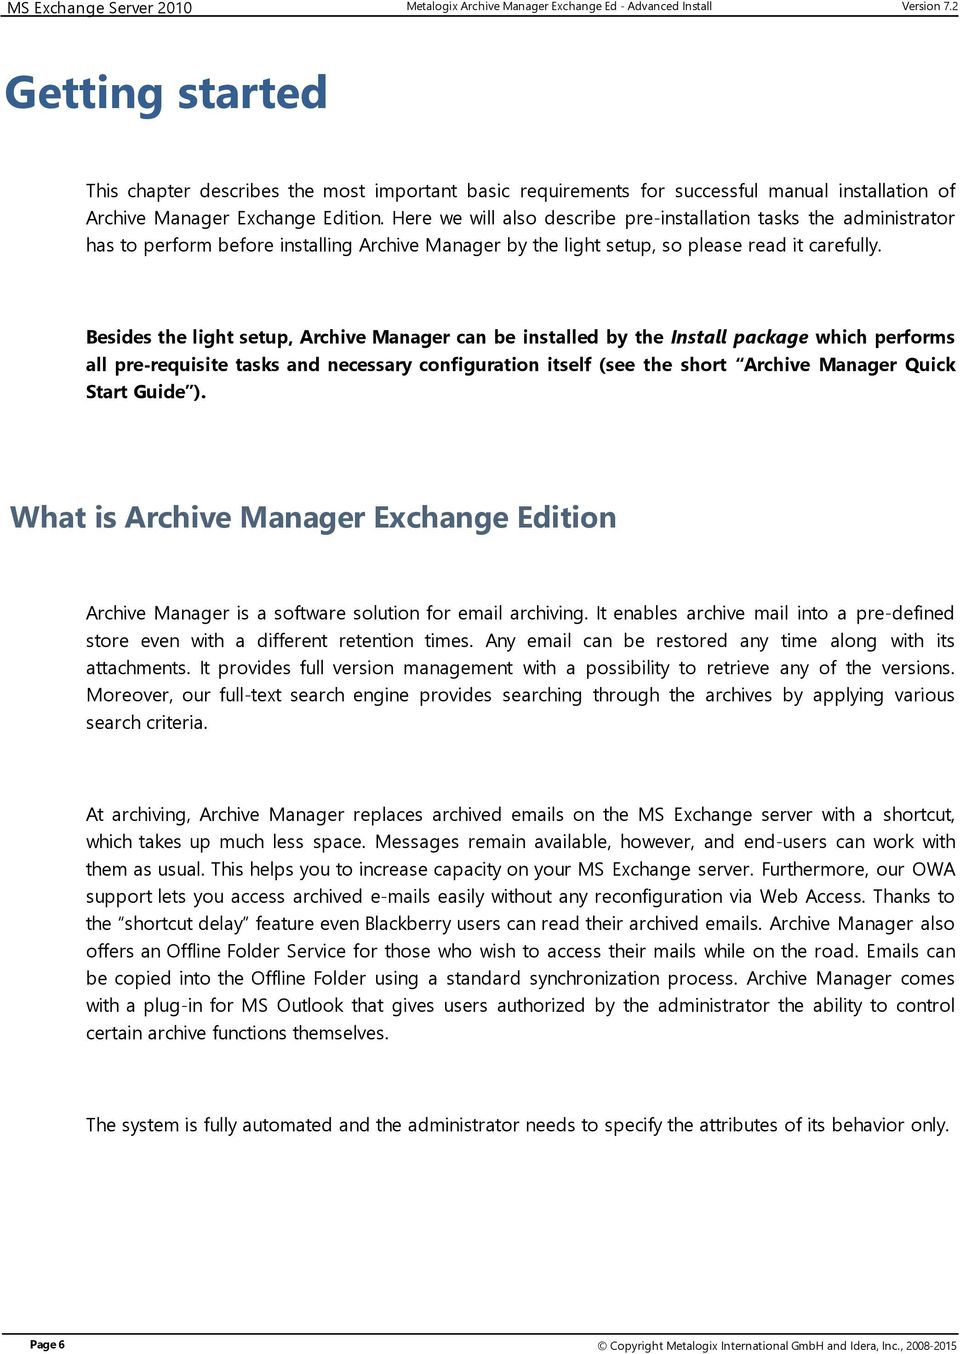 Besides the light setup, Archive Manager can be installed by the Install package which performs all pre-requisite tasks and necessary configuration itself (see the short Archive Manager Quick Start